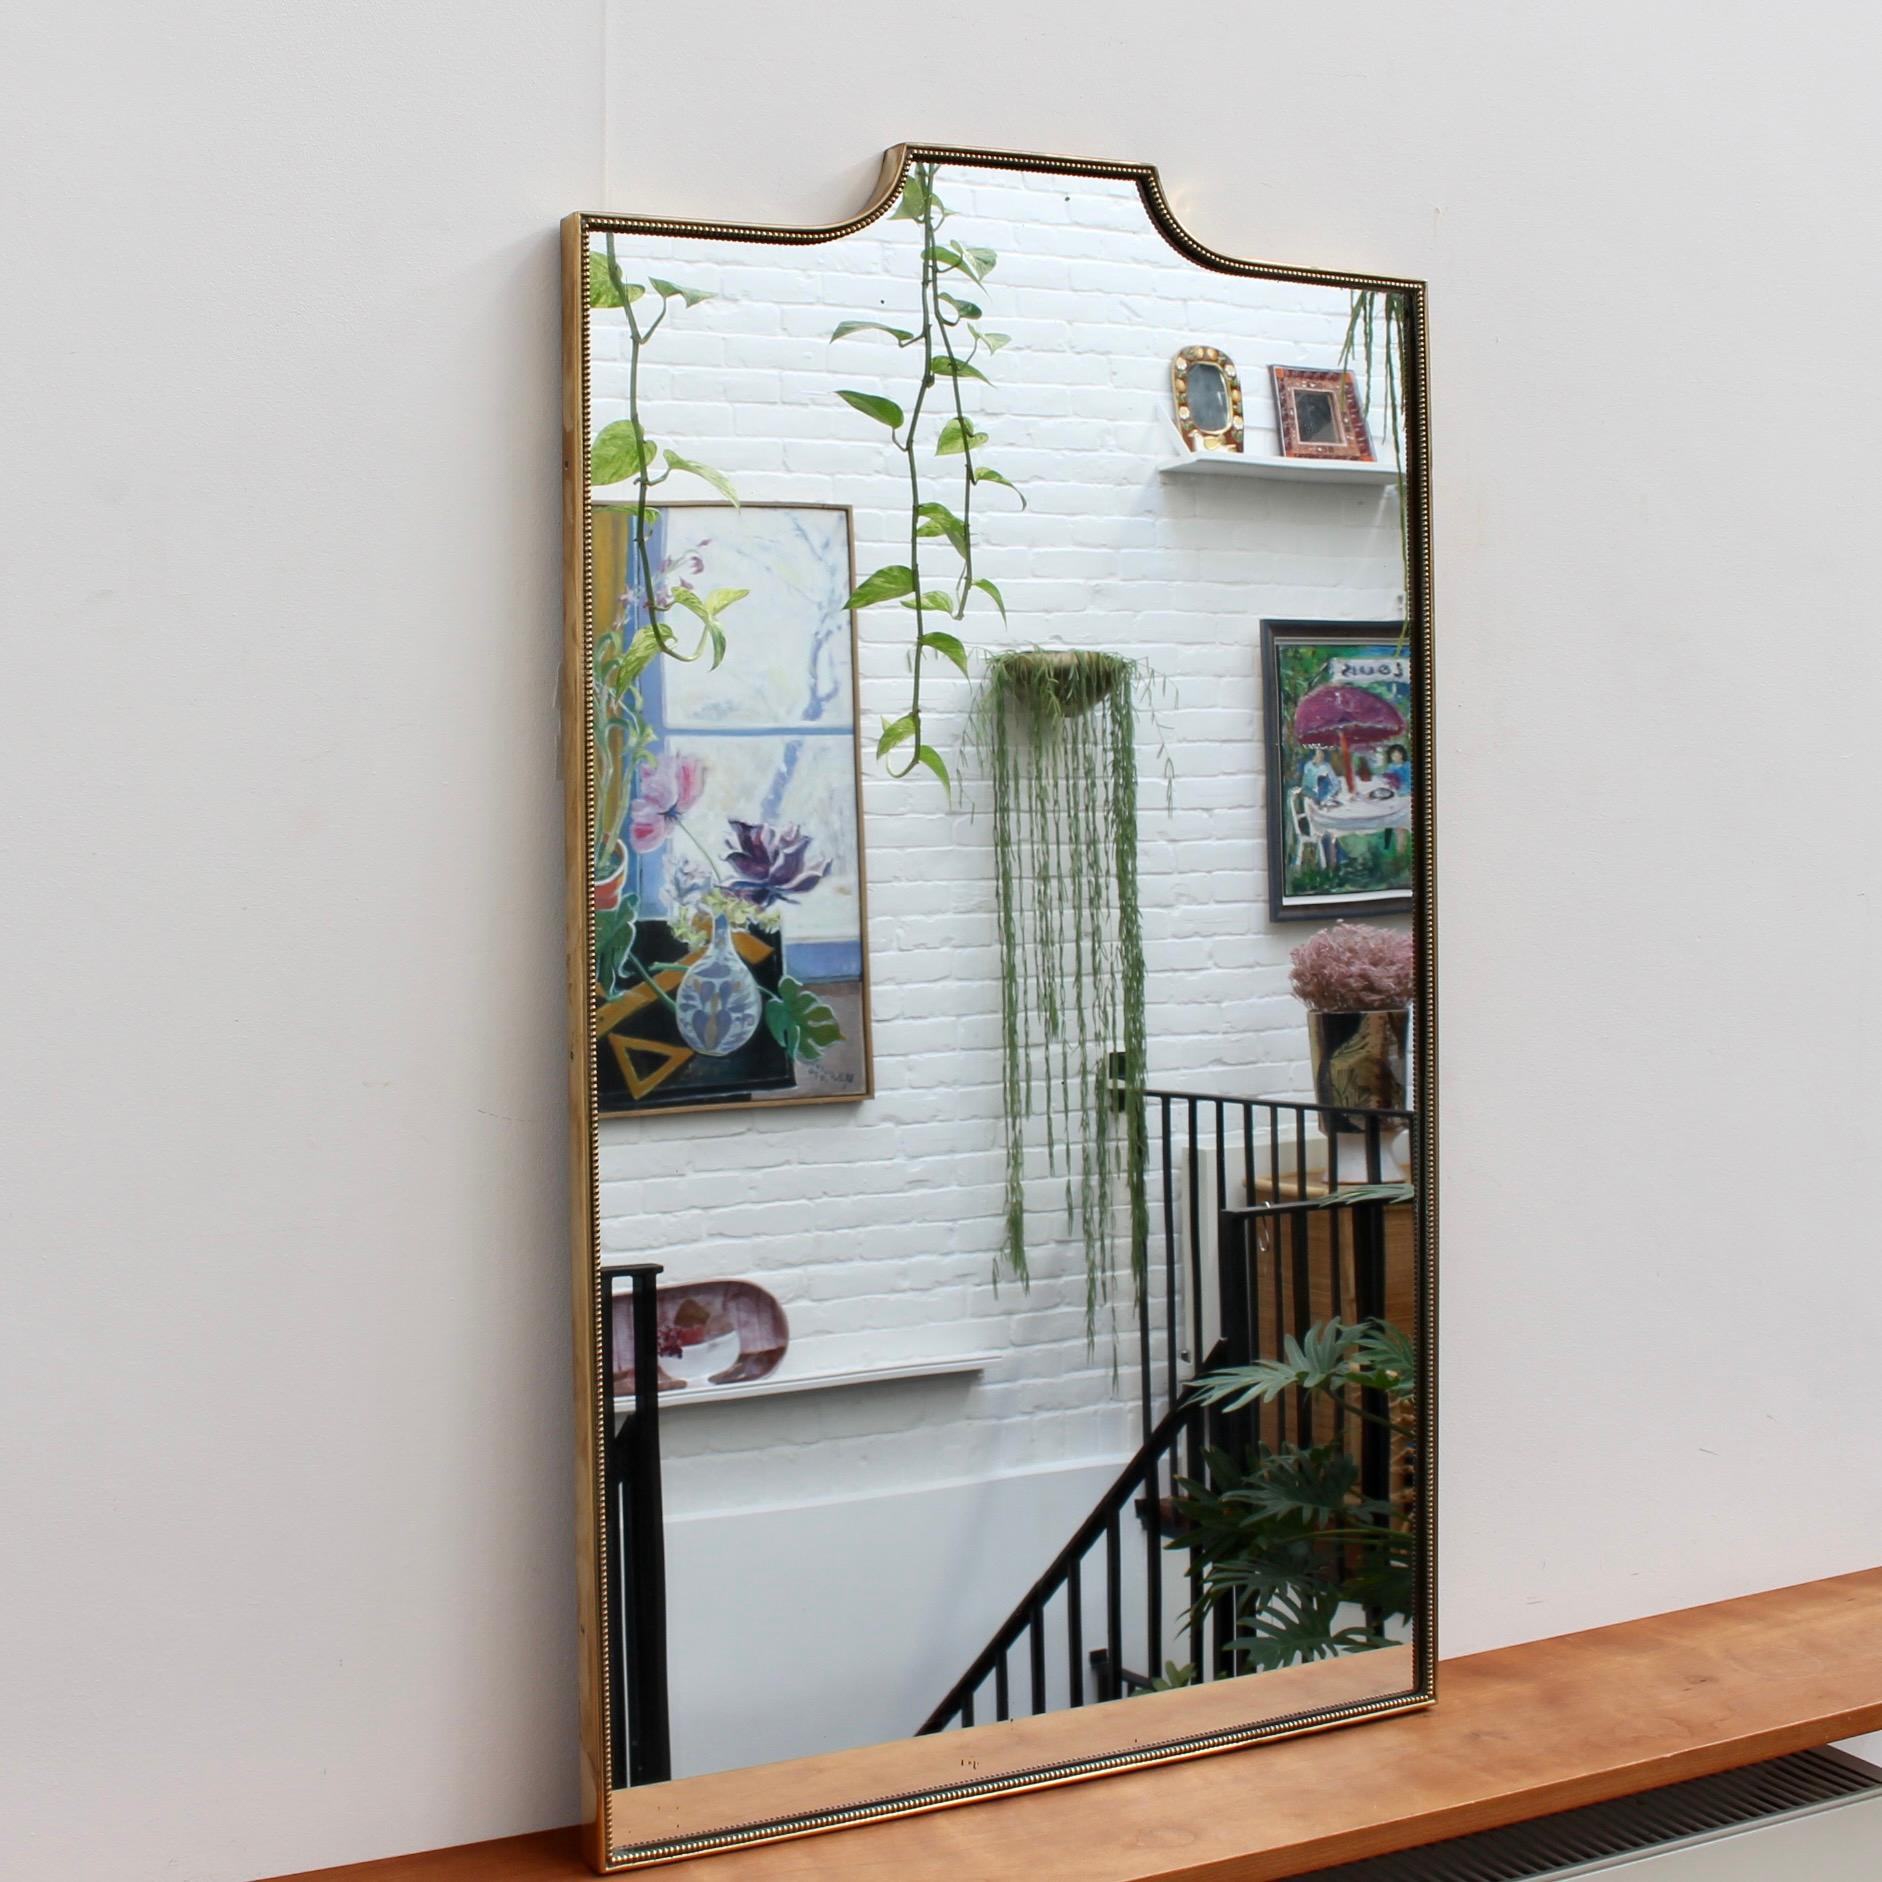 Mid-century Italian wall mirror with brass frame (circa 1950s). The mirror is large, rectangular in shape, smart and distinctive in a modern Gio Ponti style with a distinctive beading outlining the frame. The mirror sports a curve leading to a